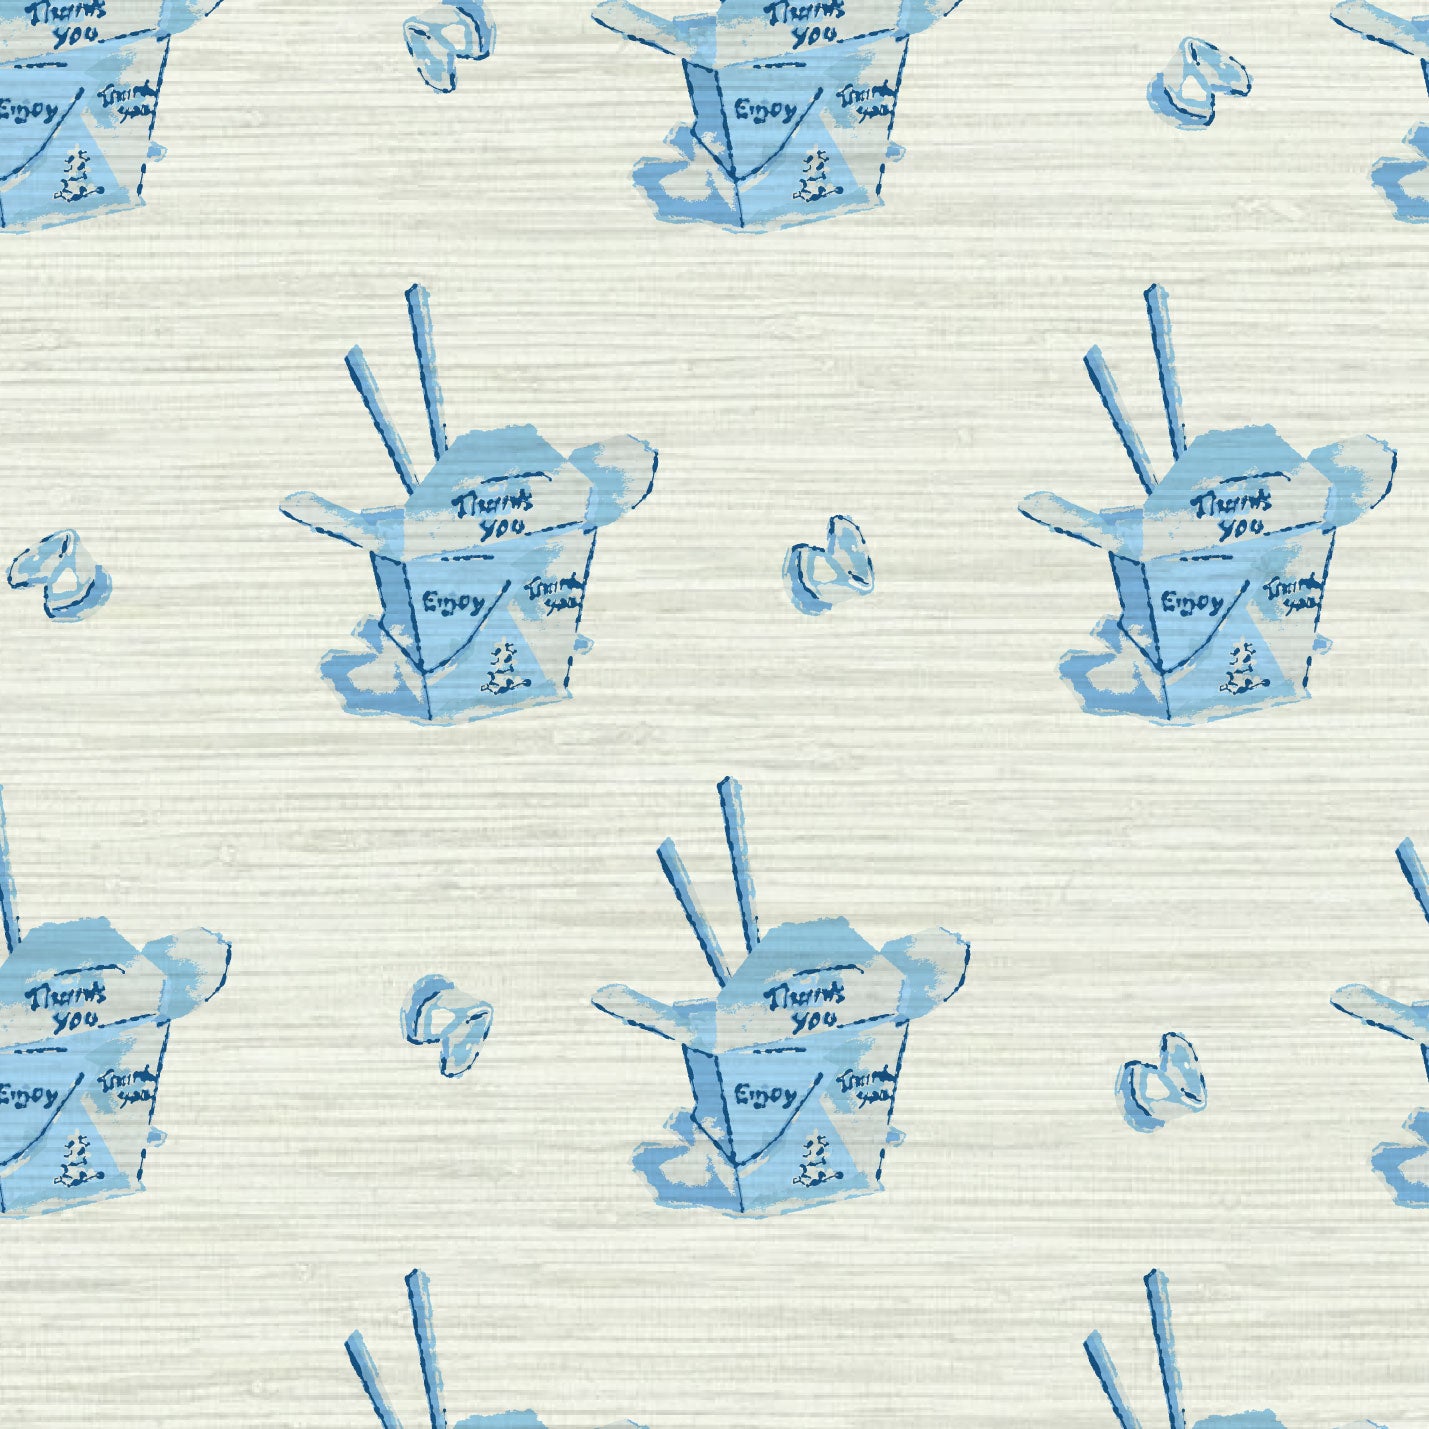 Grasscloth wallpaper Natural Textured Eco-Friendly Non-toxic High-quality  Sustainable Interior Design Bold Custom Tailor-made Retro chic Grandmillennial Maximalism  Traditional Dopamine decor food chinese box asian inspired chopsticks fortune cookie restaurant take-out french blue royal white cream